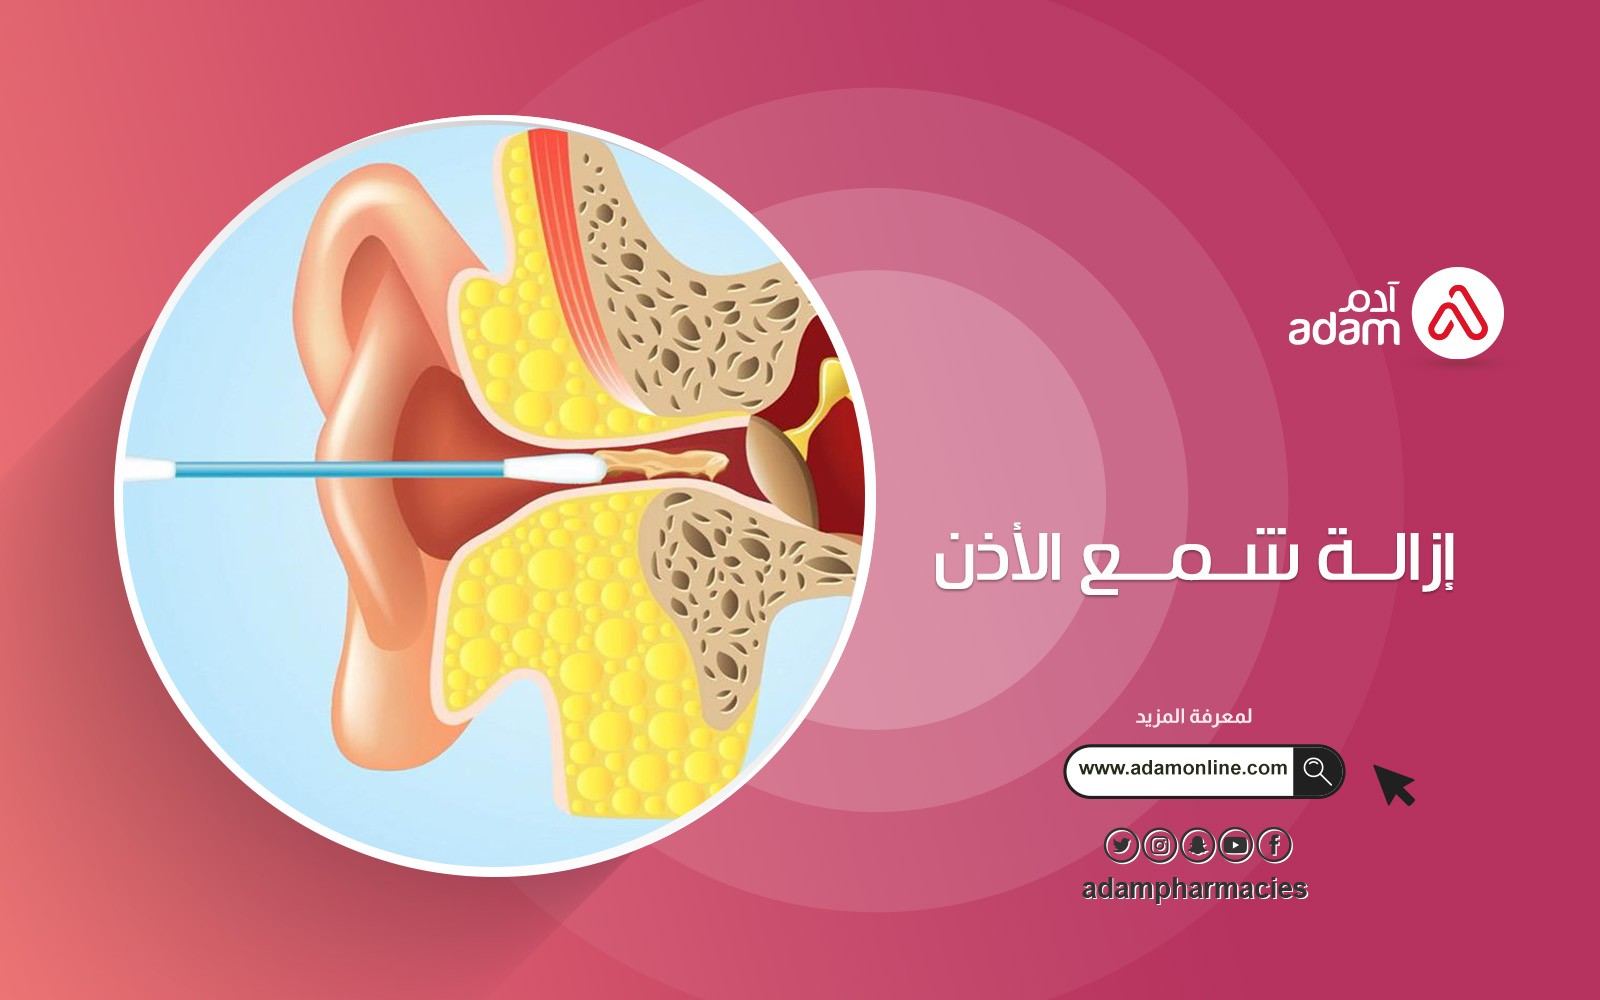 Earwax removal